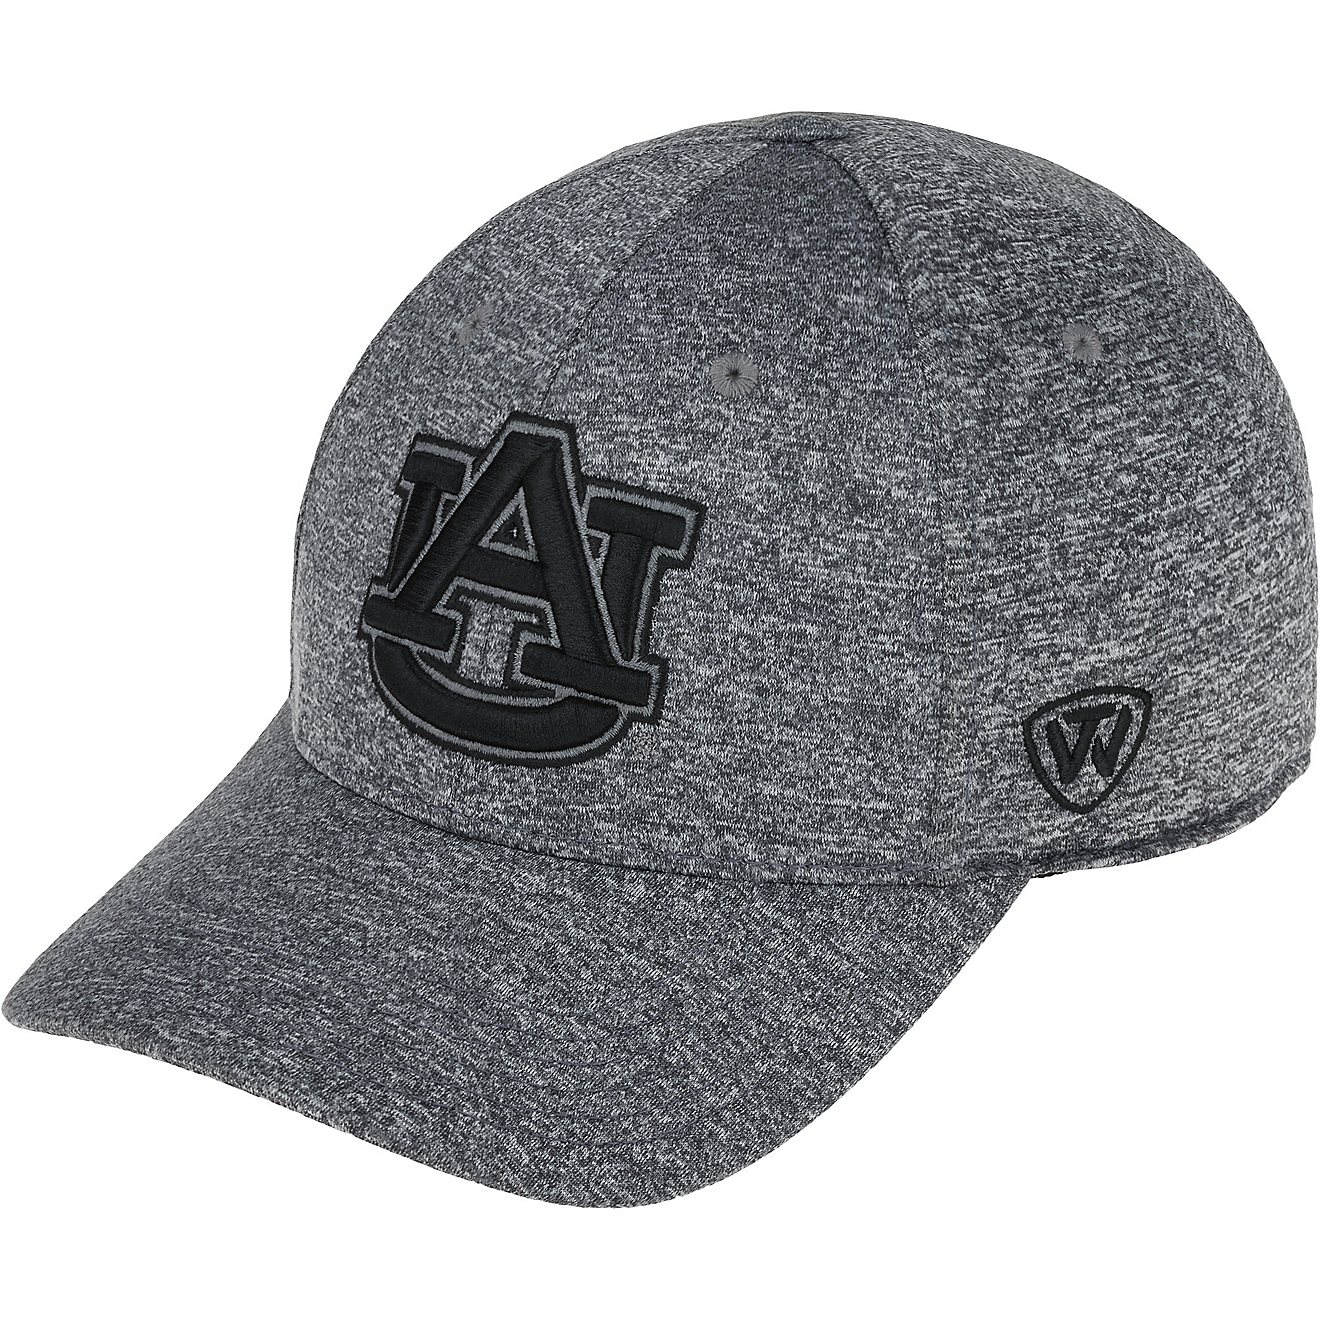 Top of the World Adults' Auburn University Steam Cap                                                                             - view number 1